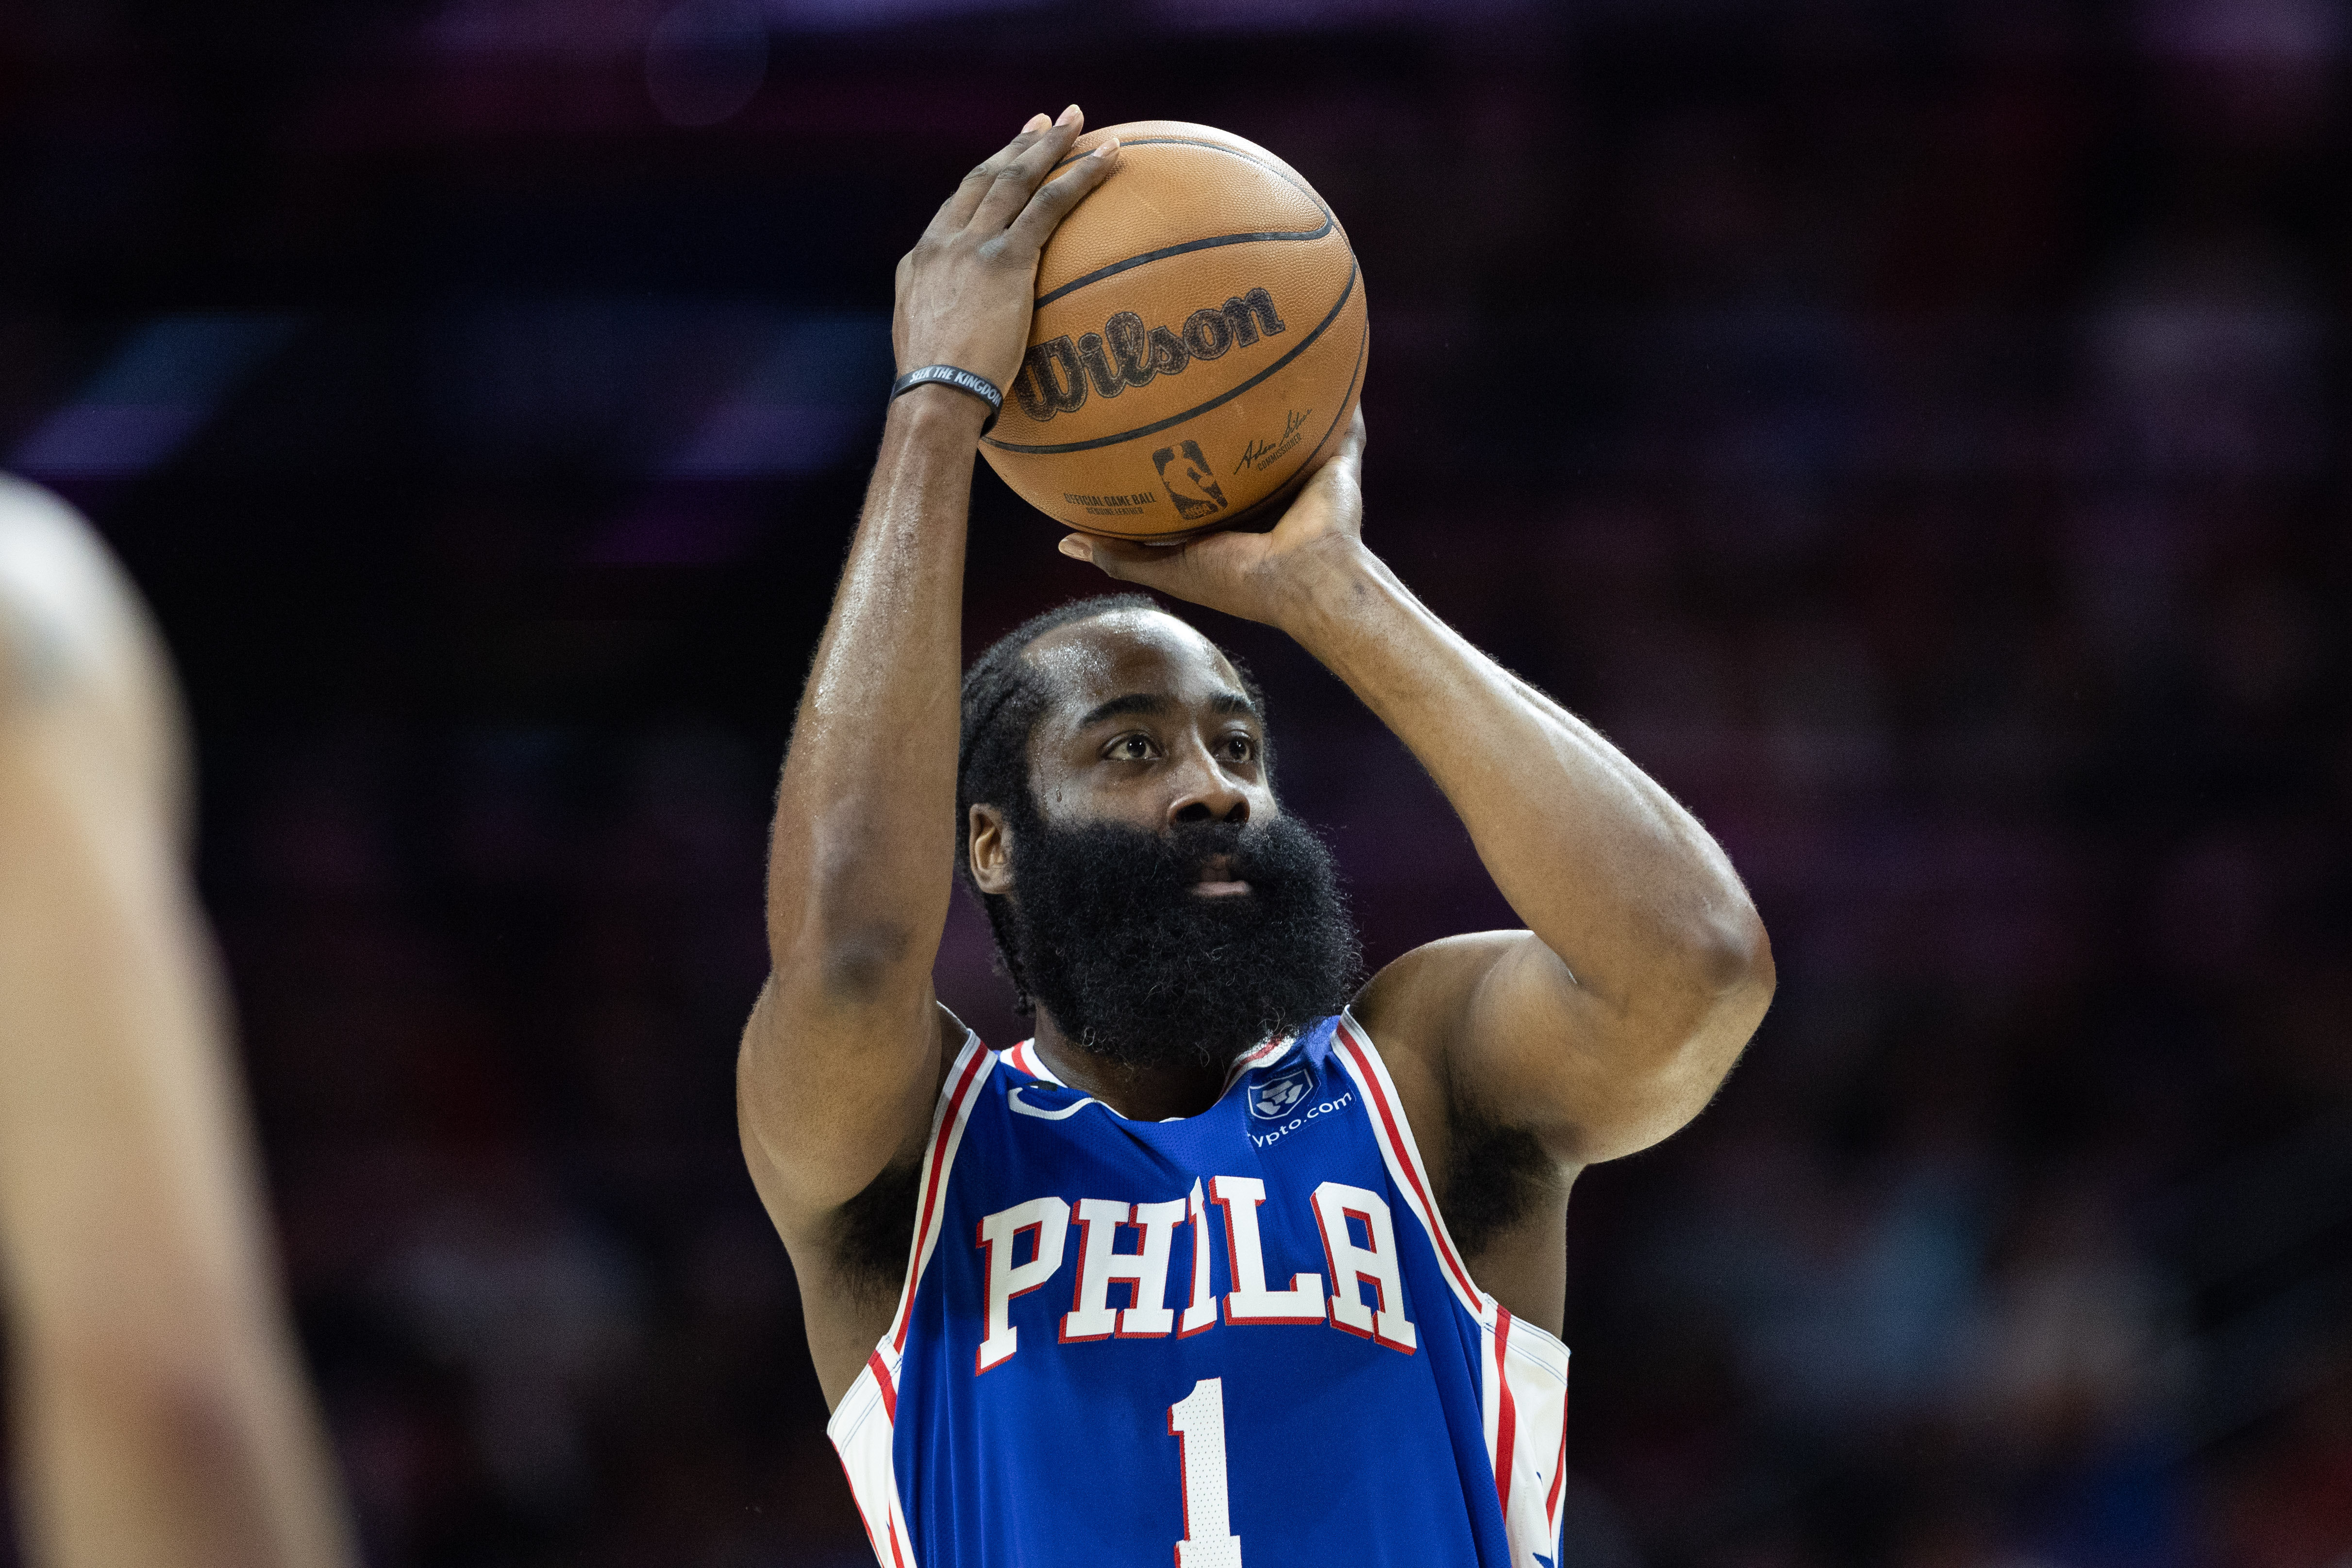 Woj on James Harden trade: The Nets wanted to find a third star